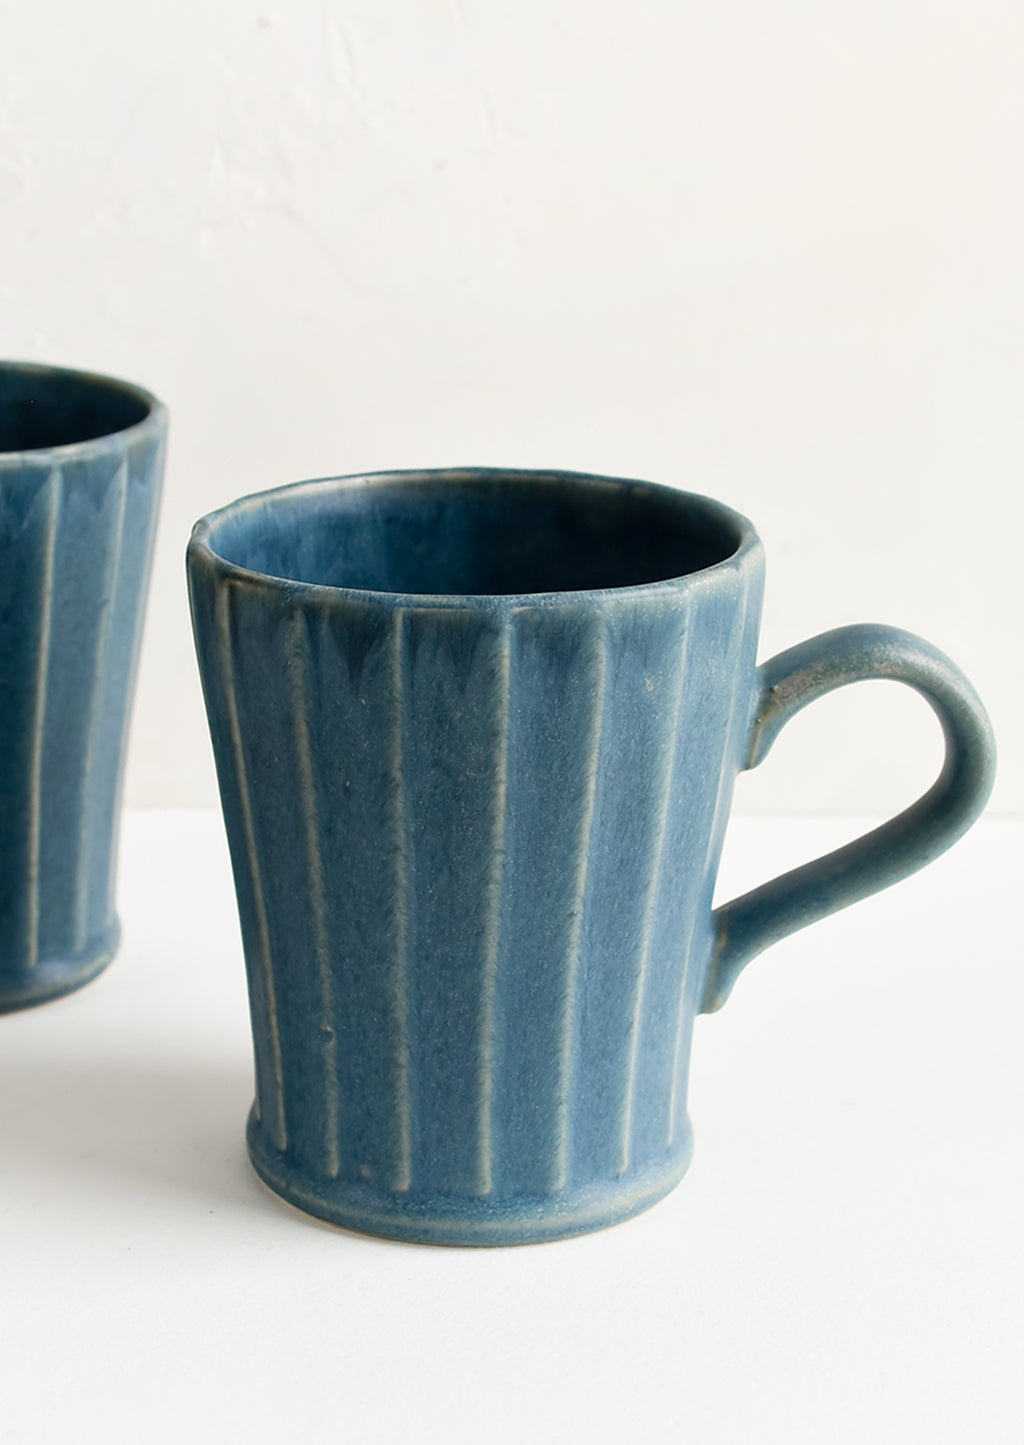 1: Blue ceramic mugs with fluted texture and tapered bottom.